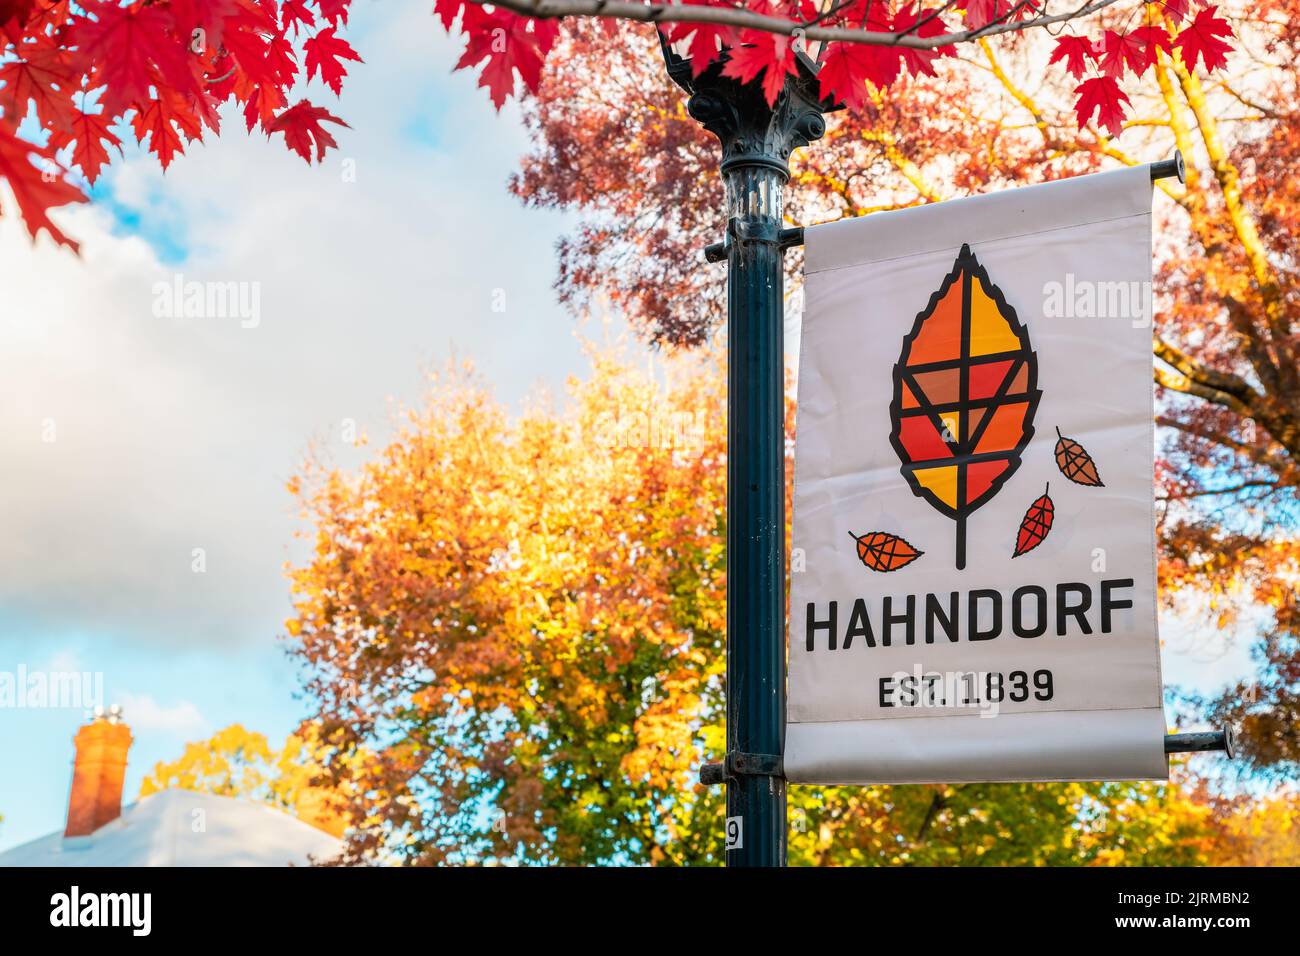 Adelaide Hills, South Australia - April 24, 2021: Hahndorf German village banner with logo on the Main street on a day during autumn season Stock Photo